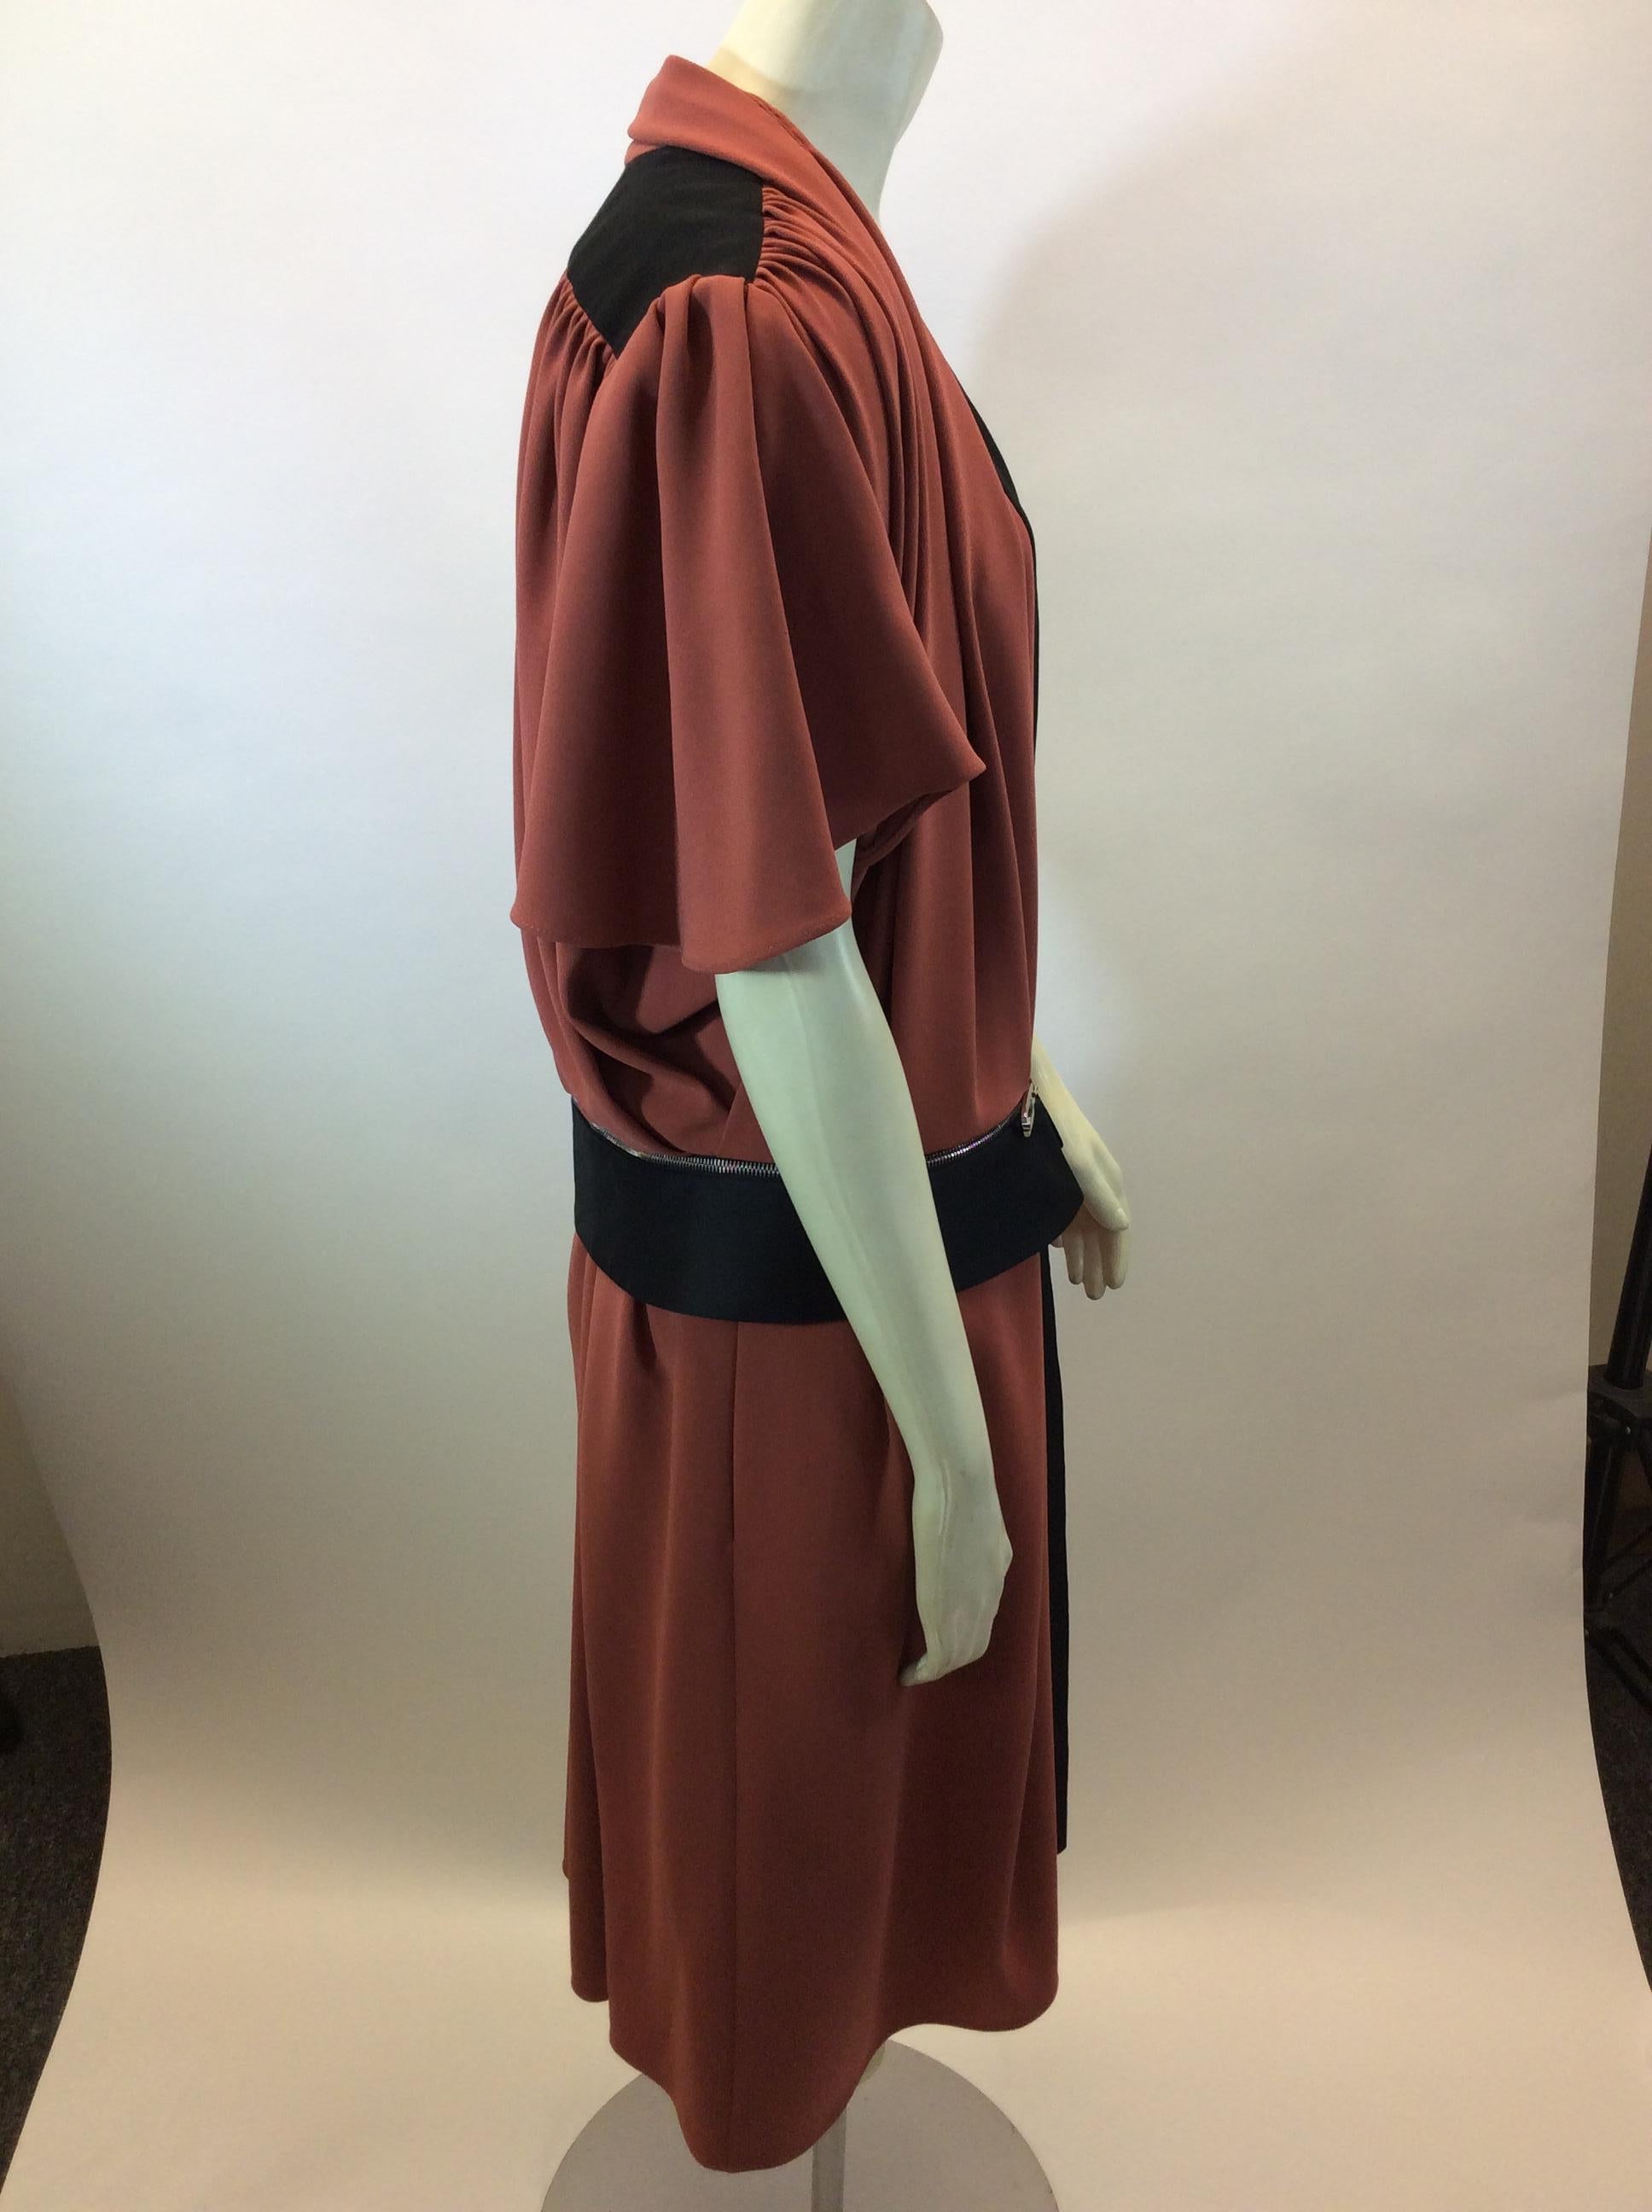 Balenciaga Pumpkin Orange and Black Dress/Coat In Excellent Condition For Sale In Narberth, PA